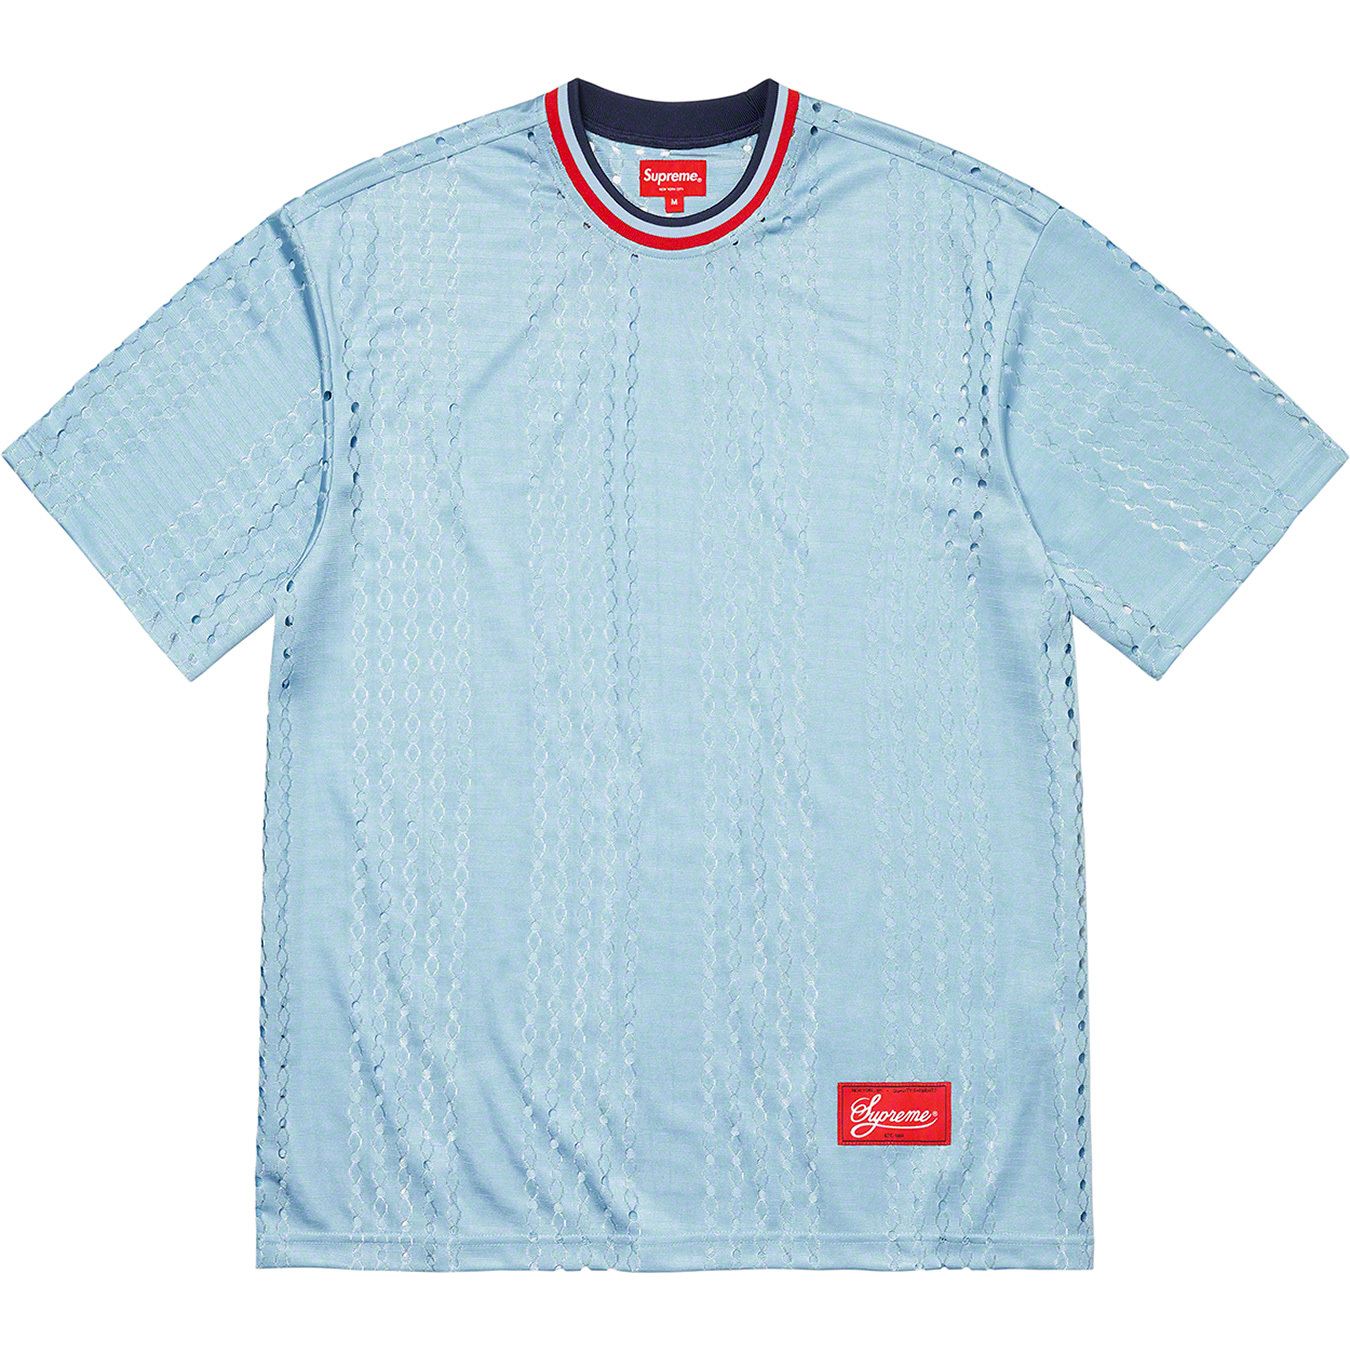 Supreme Perforated Stripe Warm Up Top